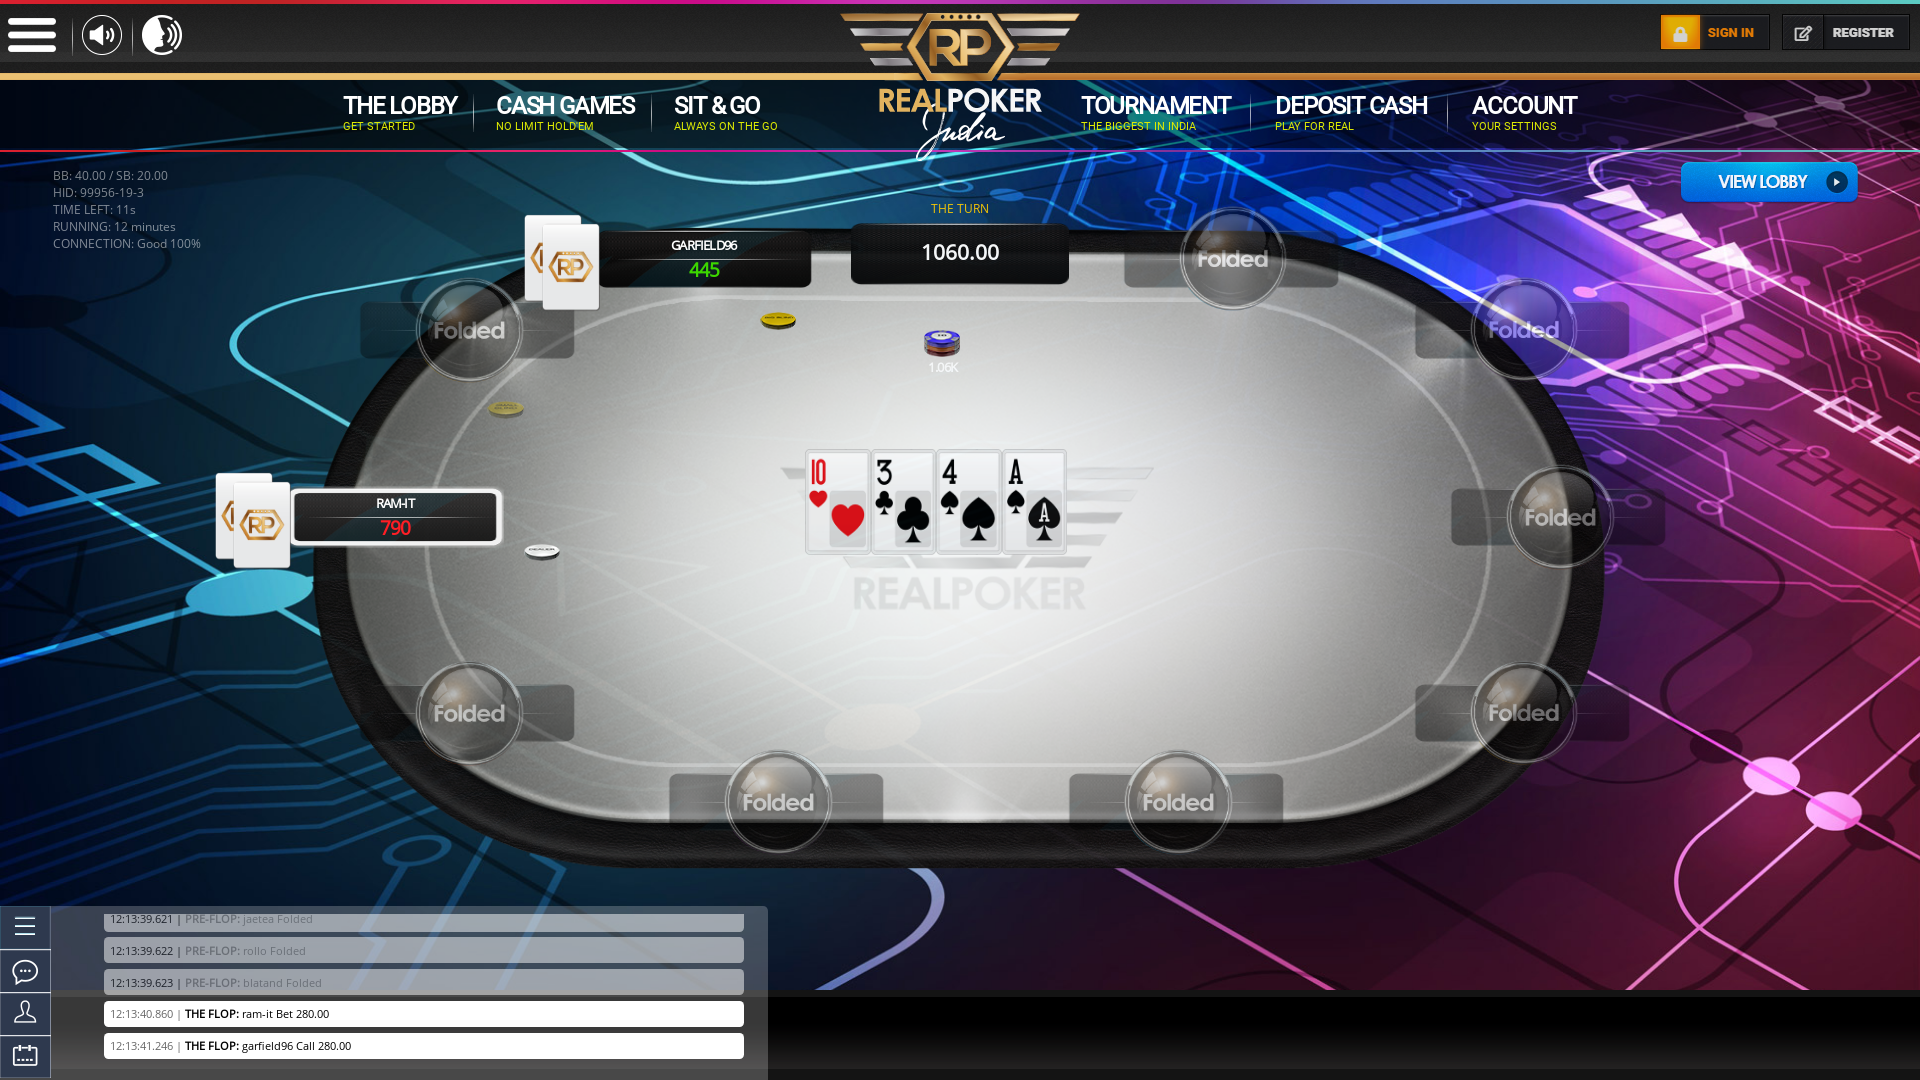 Real poker 10 player table in the 12th minute of the match